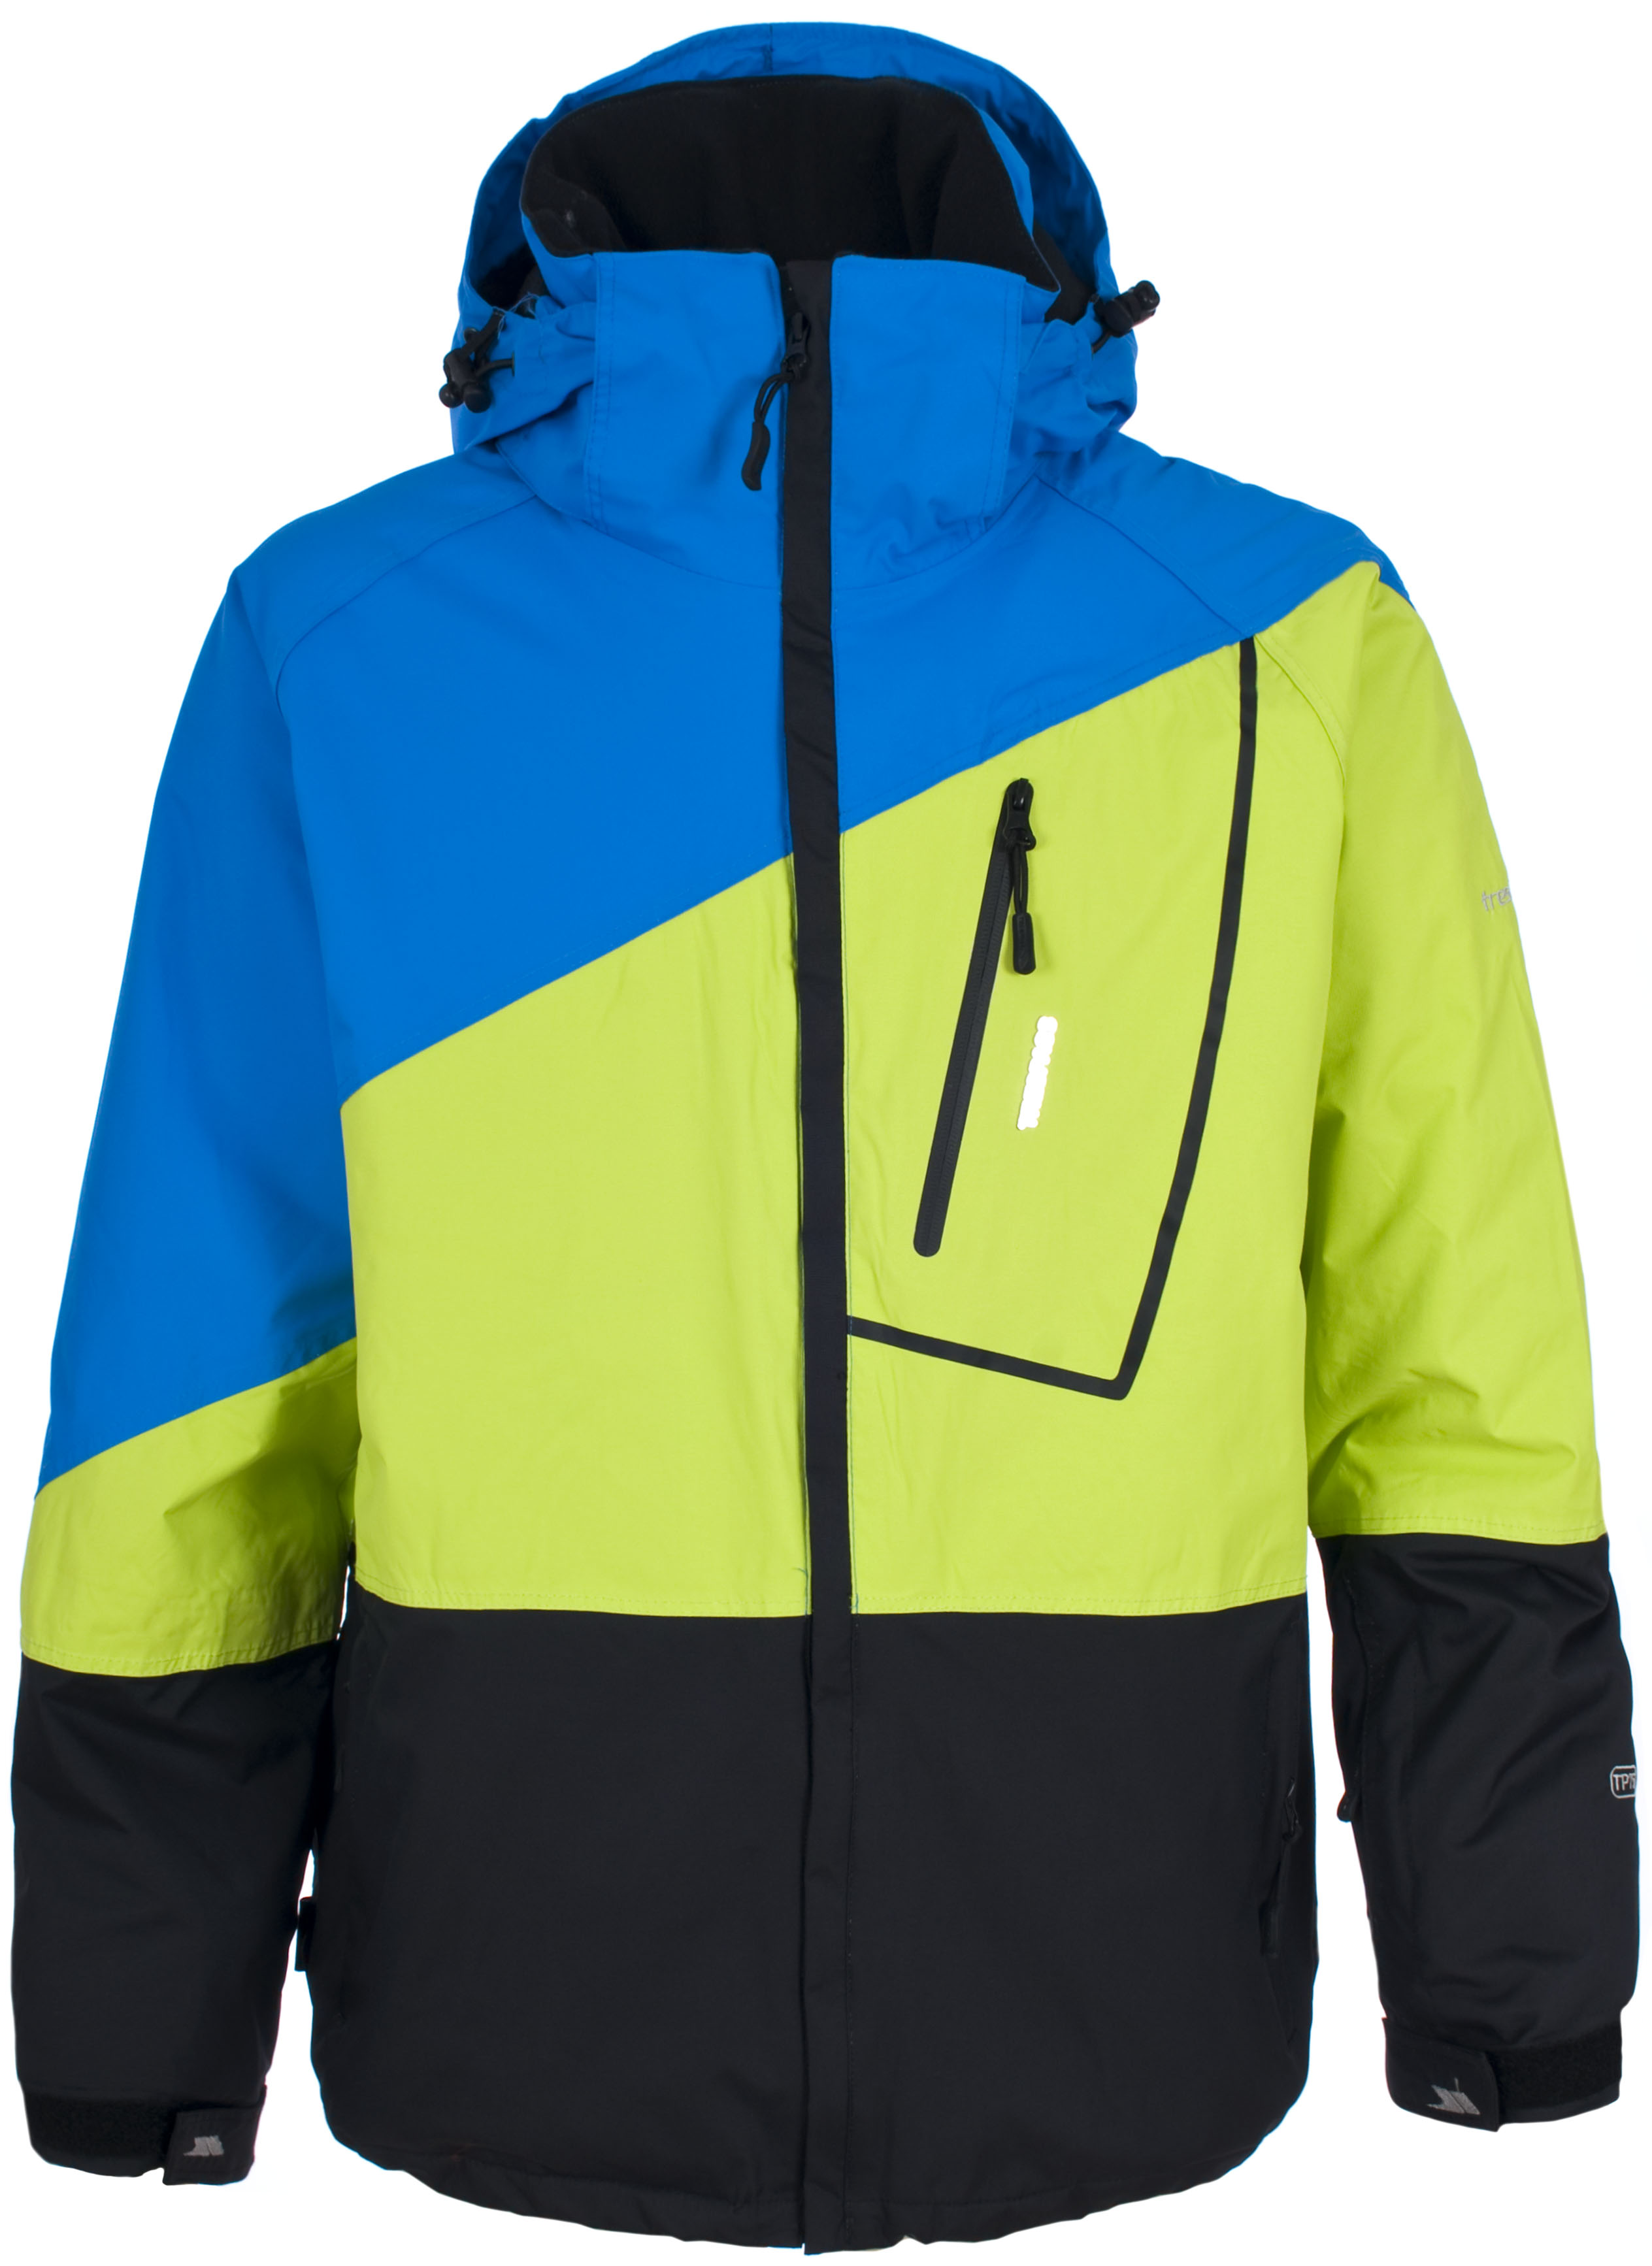 Clothing Brand Pictures : Online Discount Ski Clothing Store ...